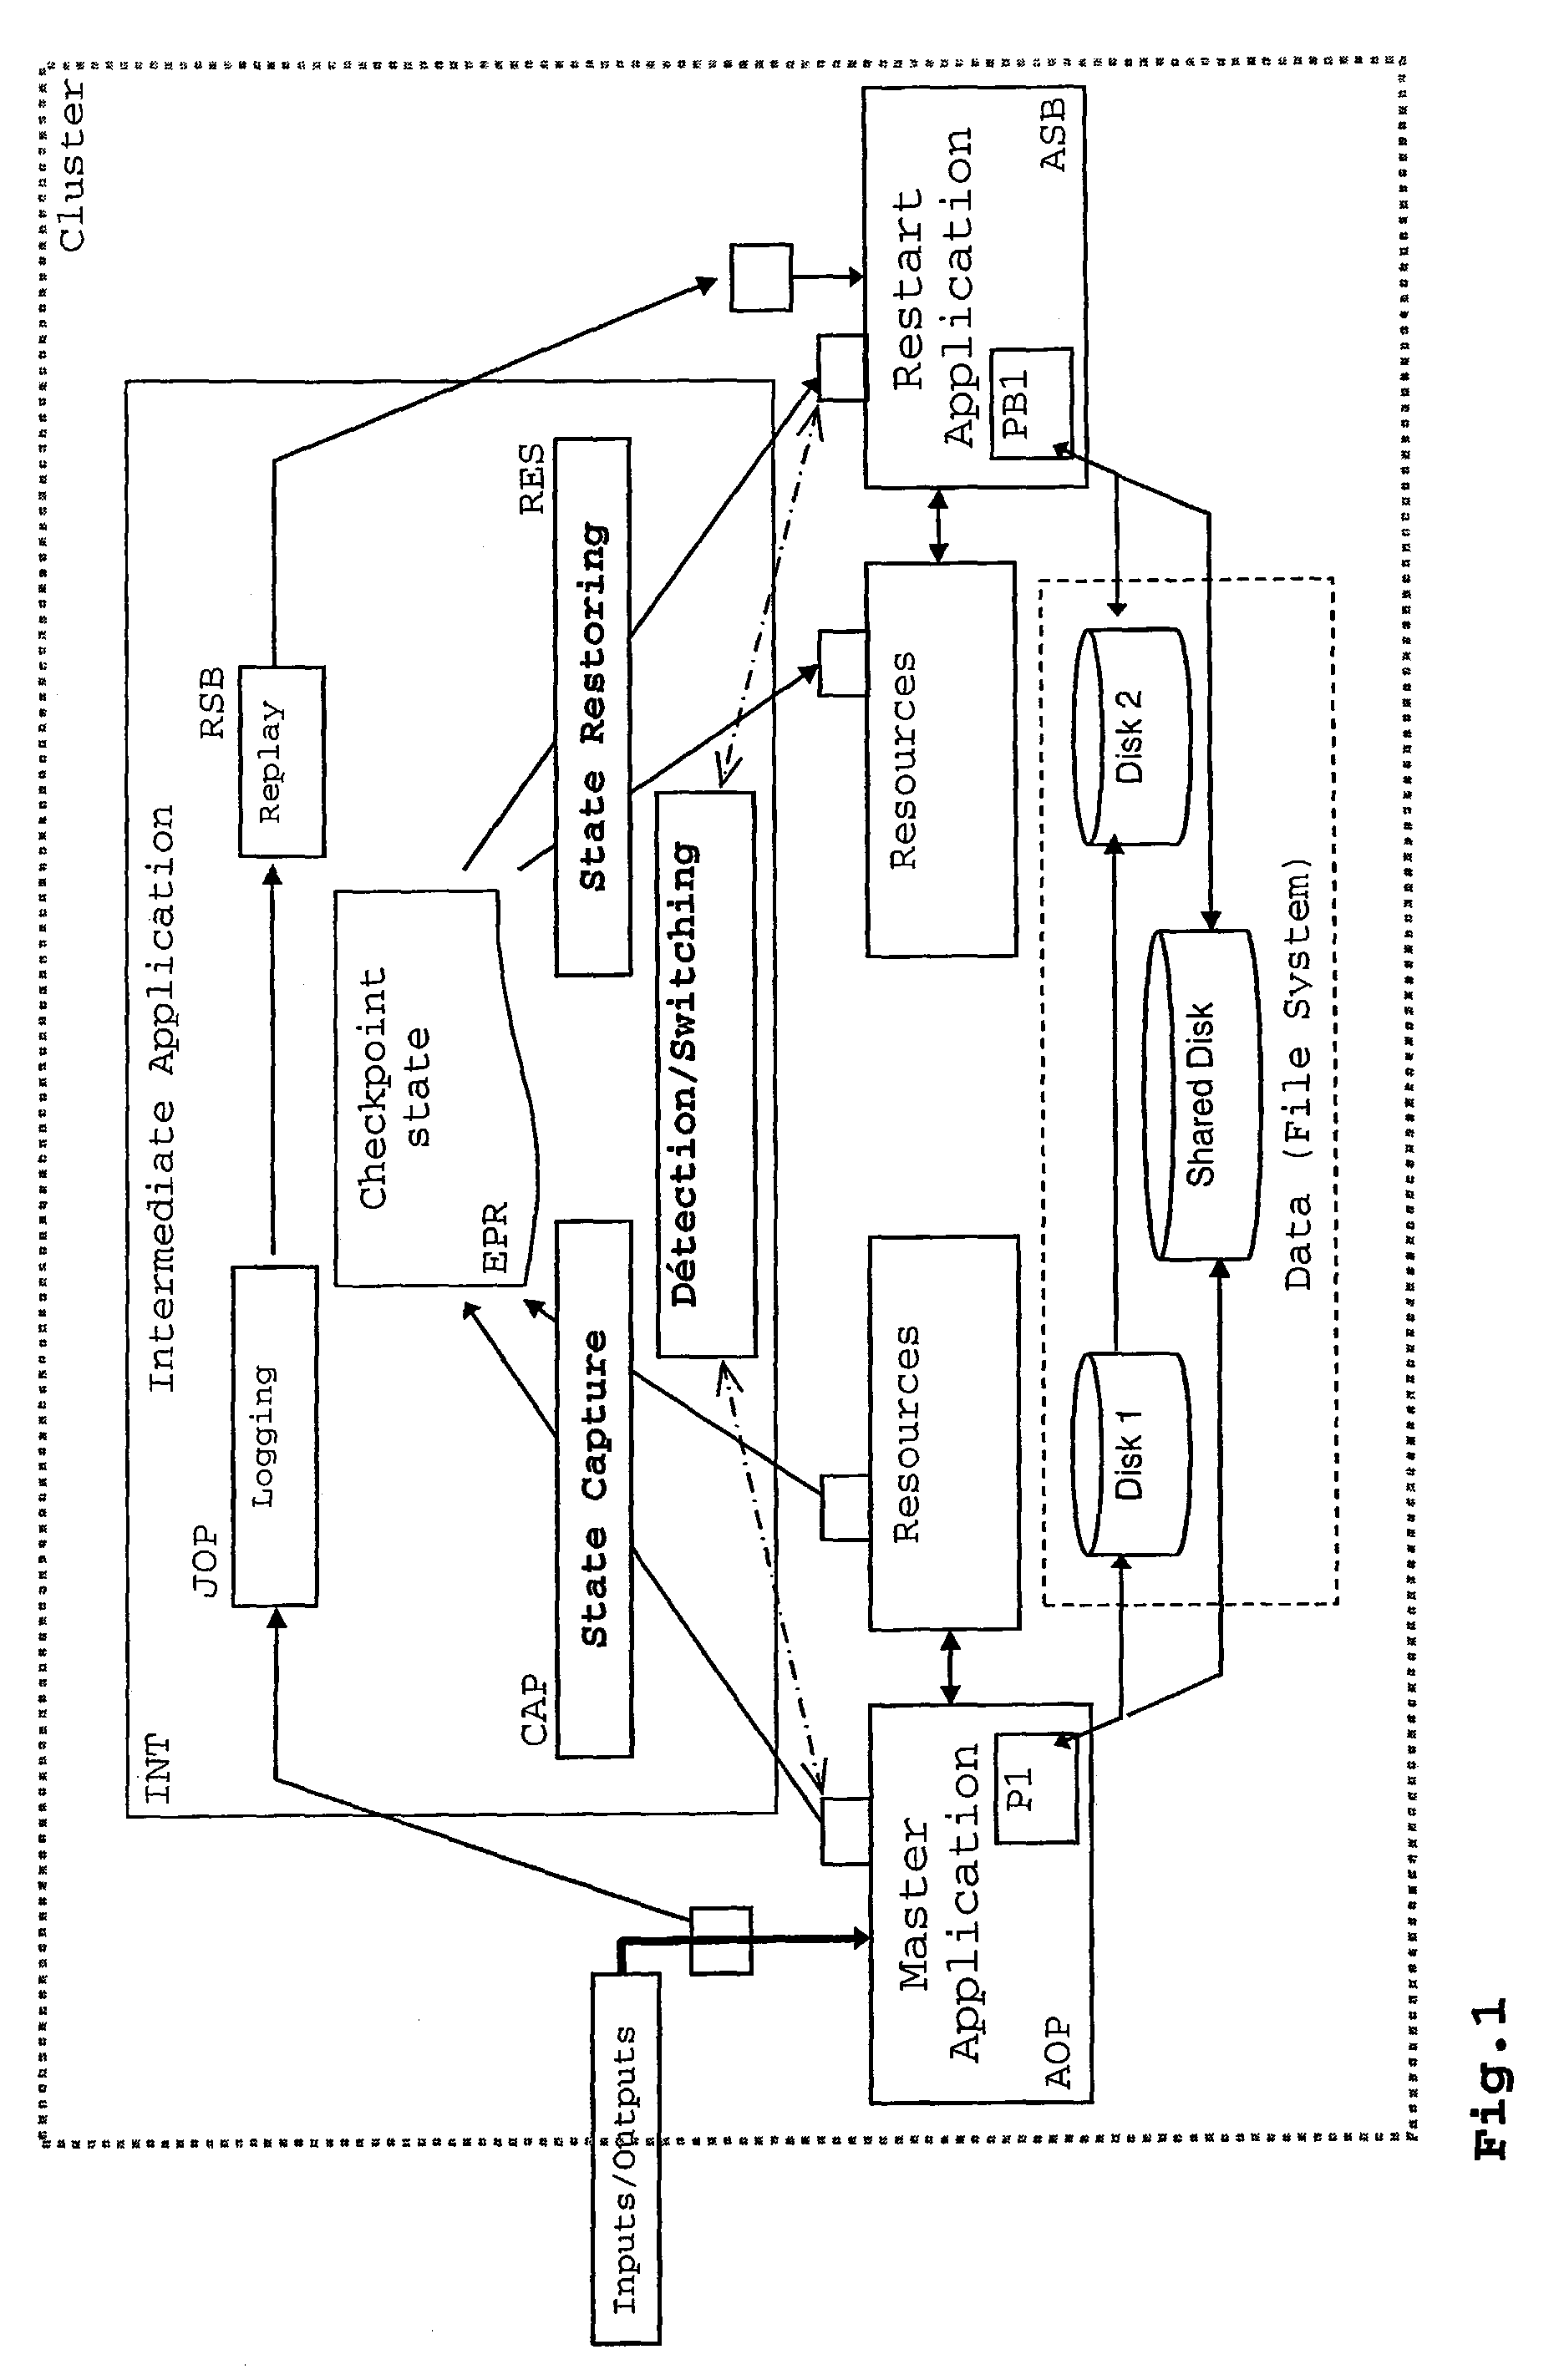 Predictive Method for Managing Logging or Replaying Non-Deterministic Operations within the Execution of an Application Process